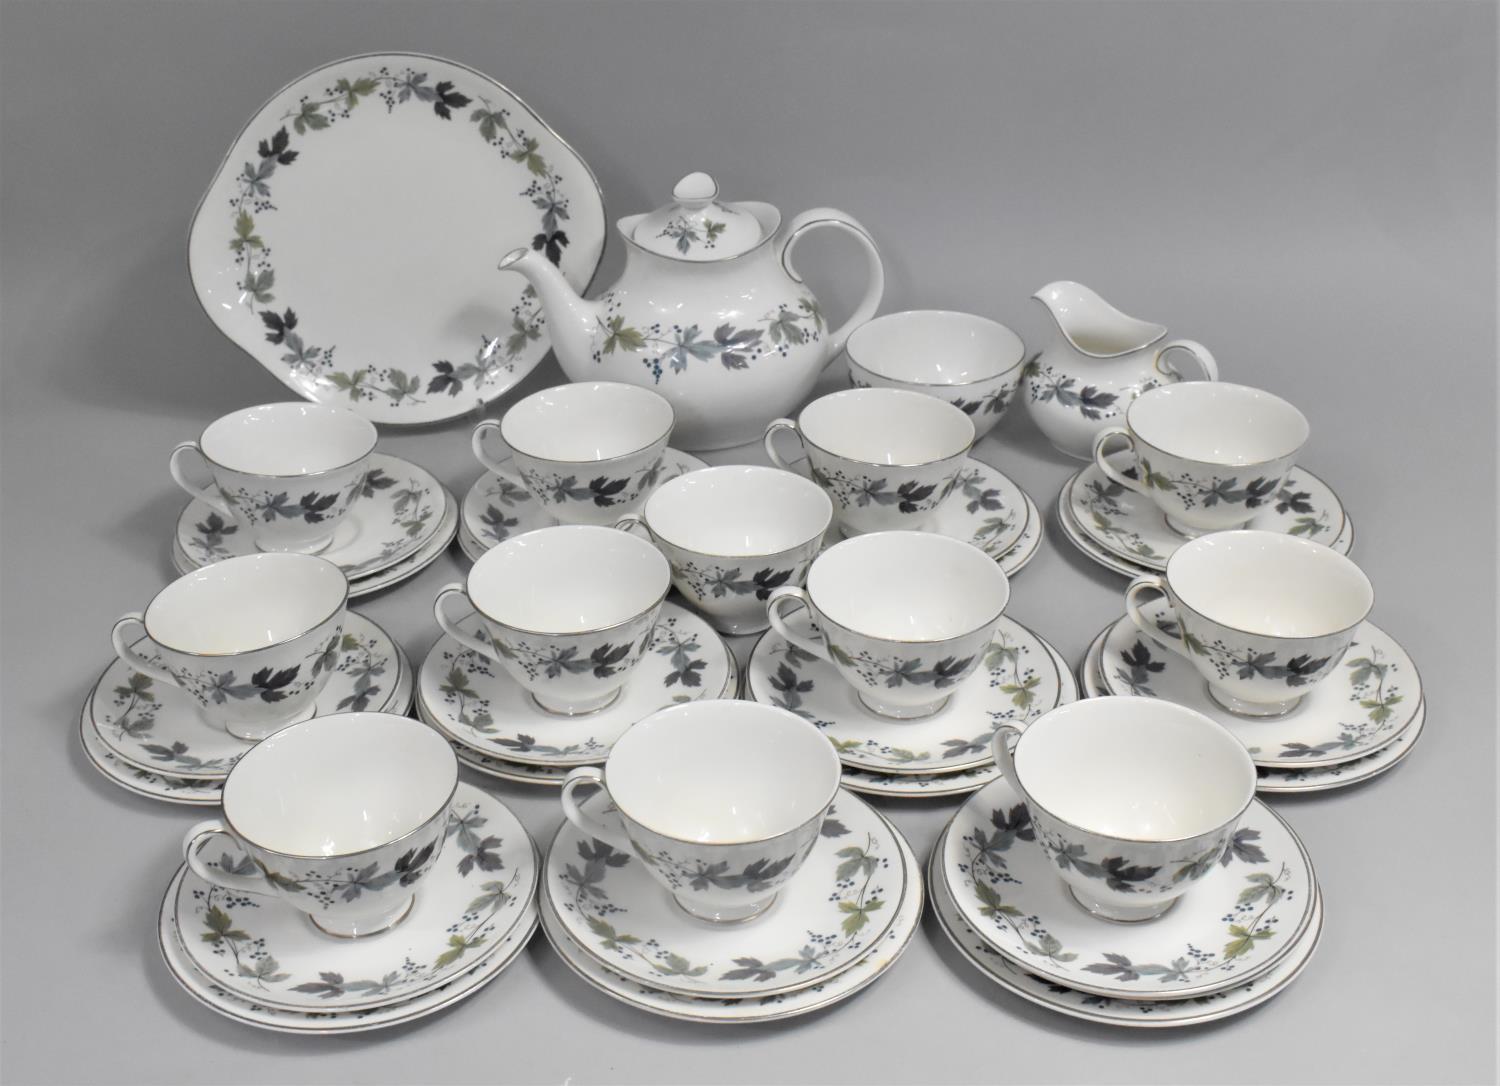 A Royal Doulton Burgundy Pattern Teaset to Comprise Cups, Saucers, Side Plates, Teapot, Cakeplate